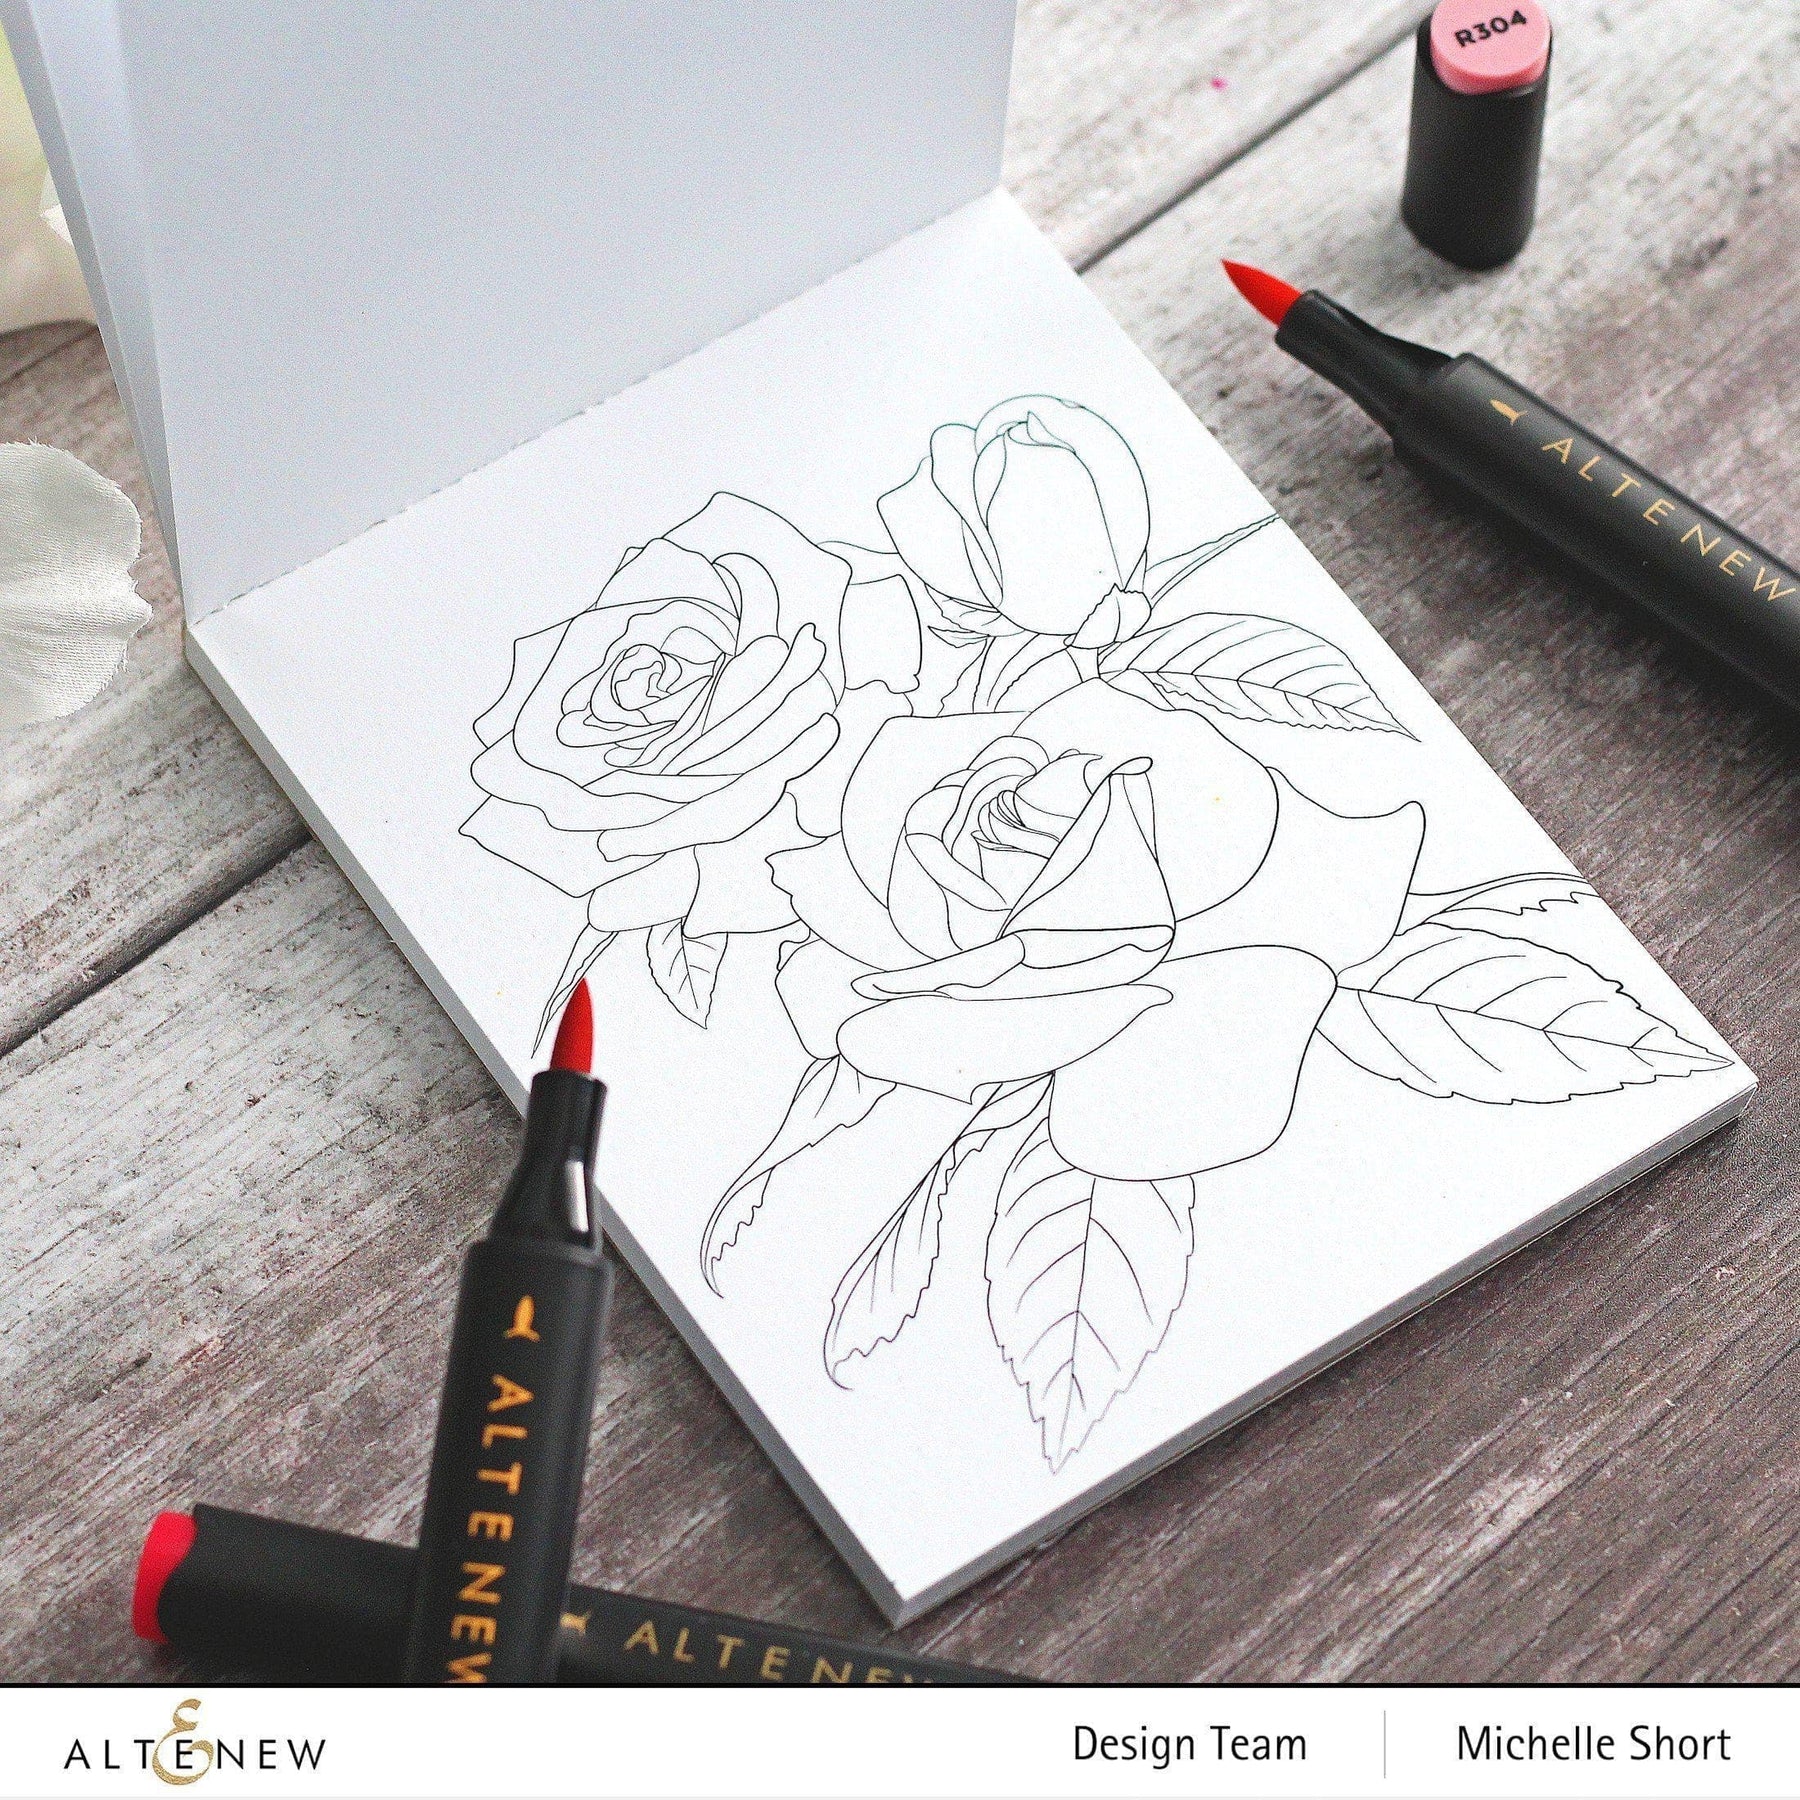 6 Best Art Marker Sets for Coloring Enthusiasts and Professionals – Altenew